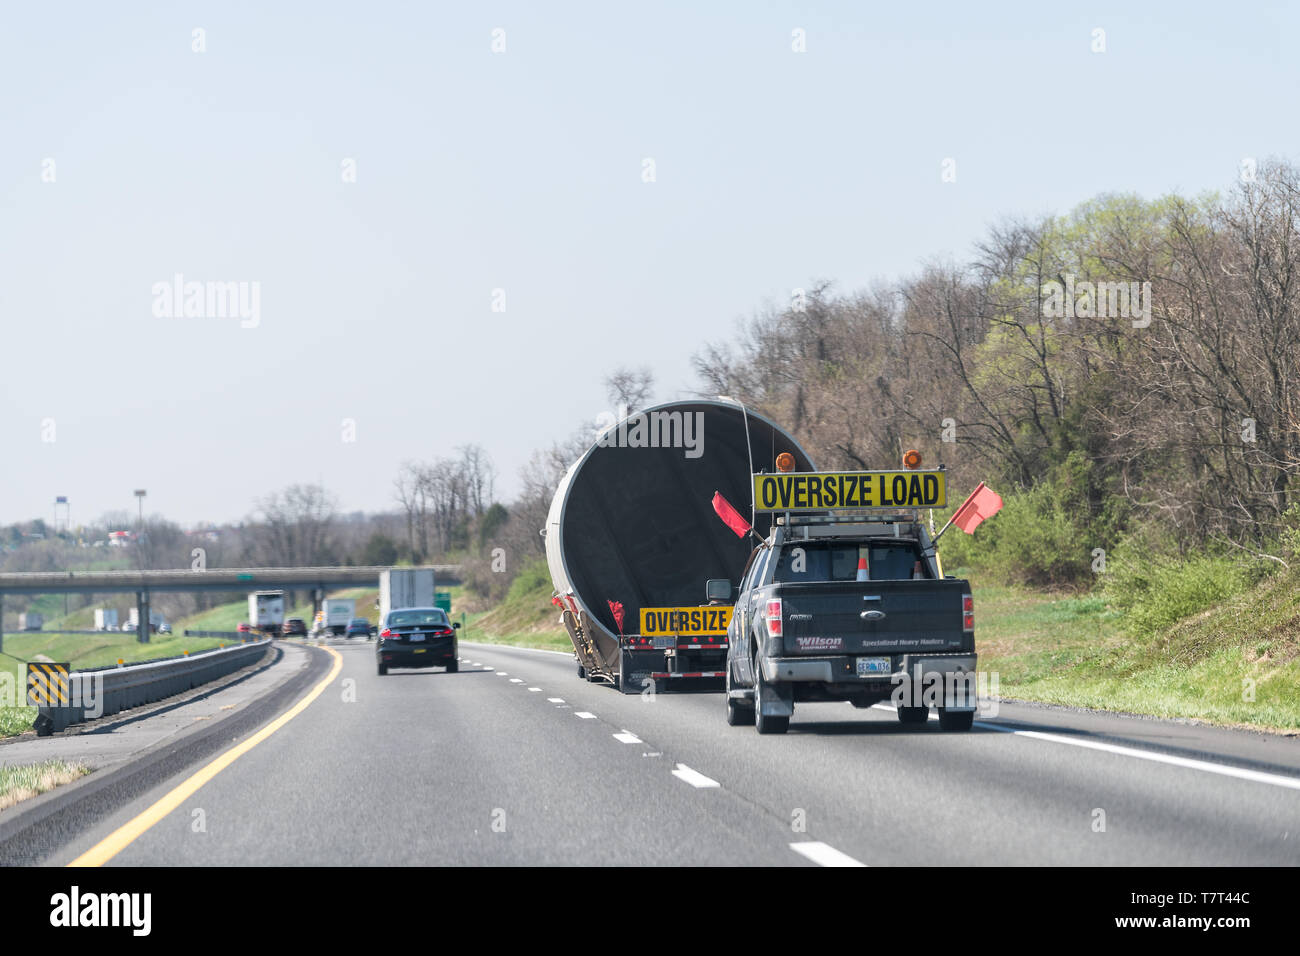 Woodstock, USA - April 18, 2018: Hauler truck trailer hauling oversize load of concrete pipe tube on interstate highway road in Virginia with yellow w Stock Photo